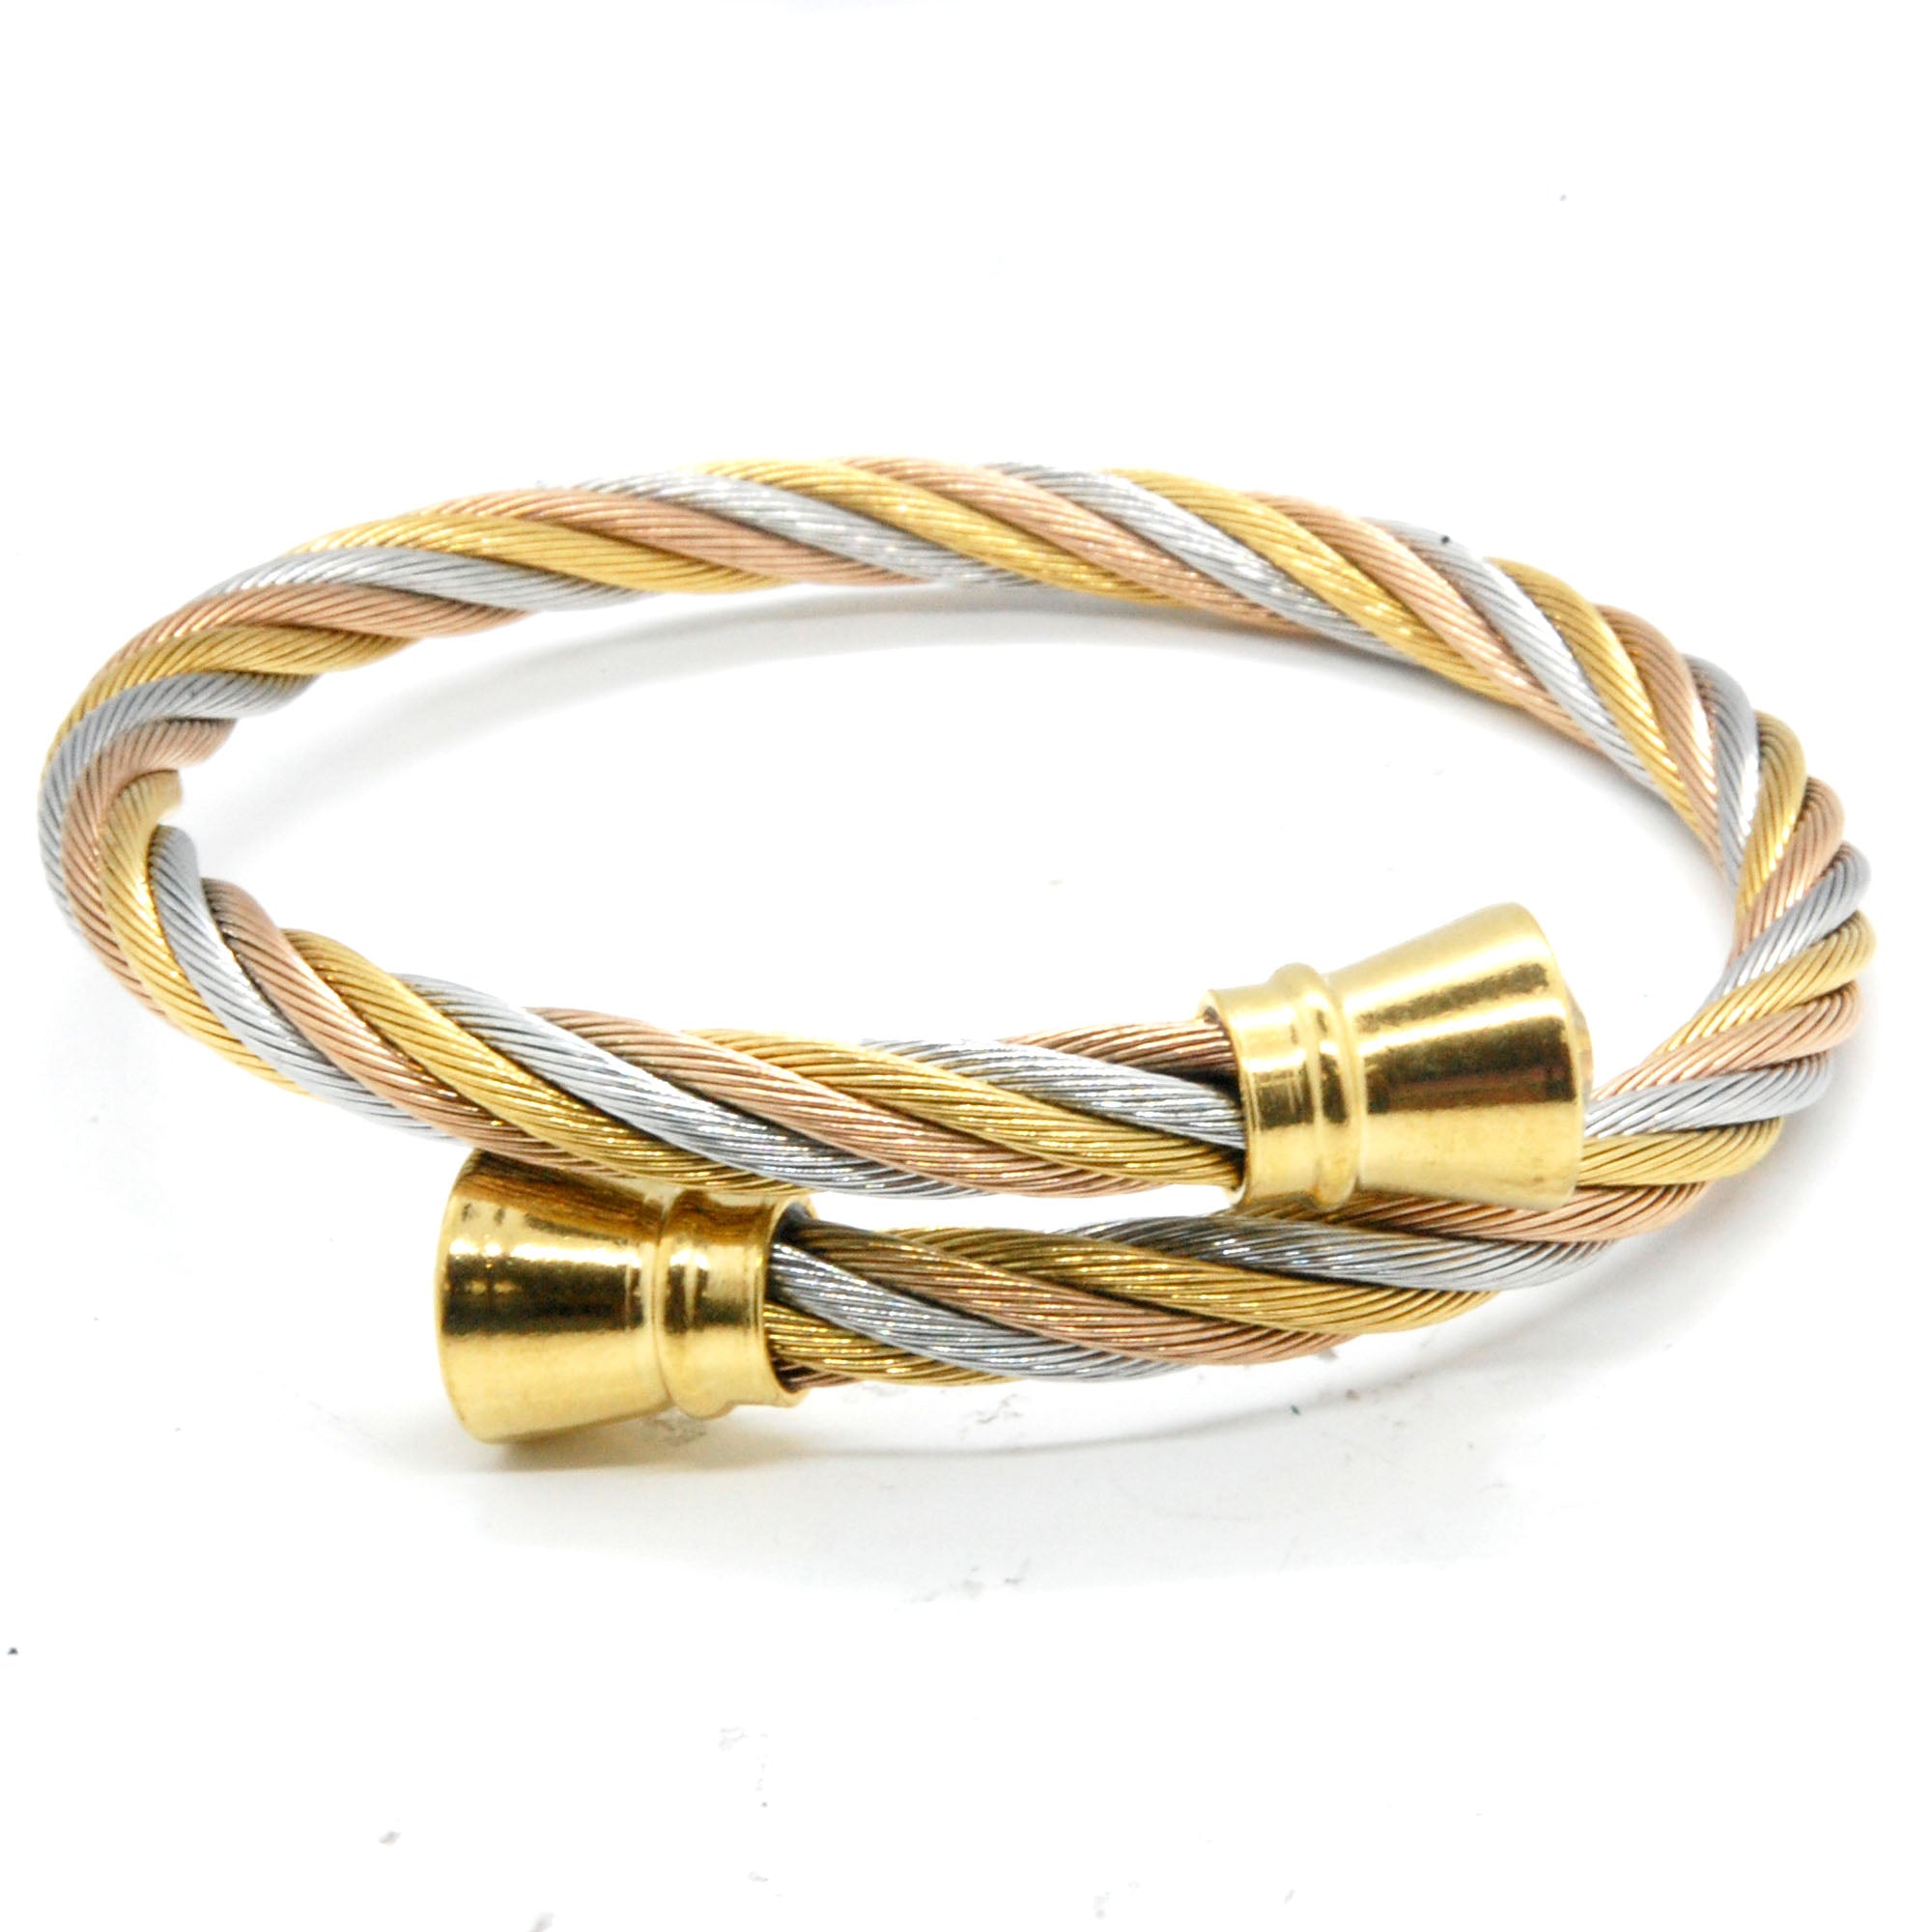 ESBG 6192: 3-Tone Twisted Charriol Bangle w/ Gold Barrel Ends (White, Yellow Gold, Rose Gold)